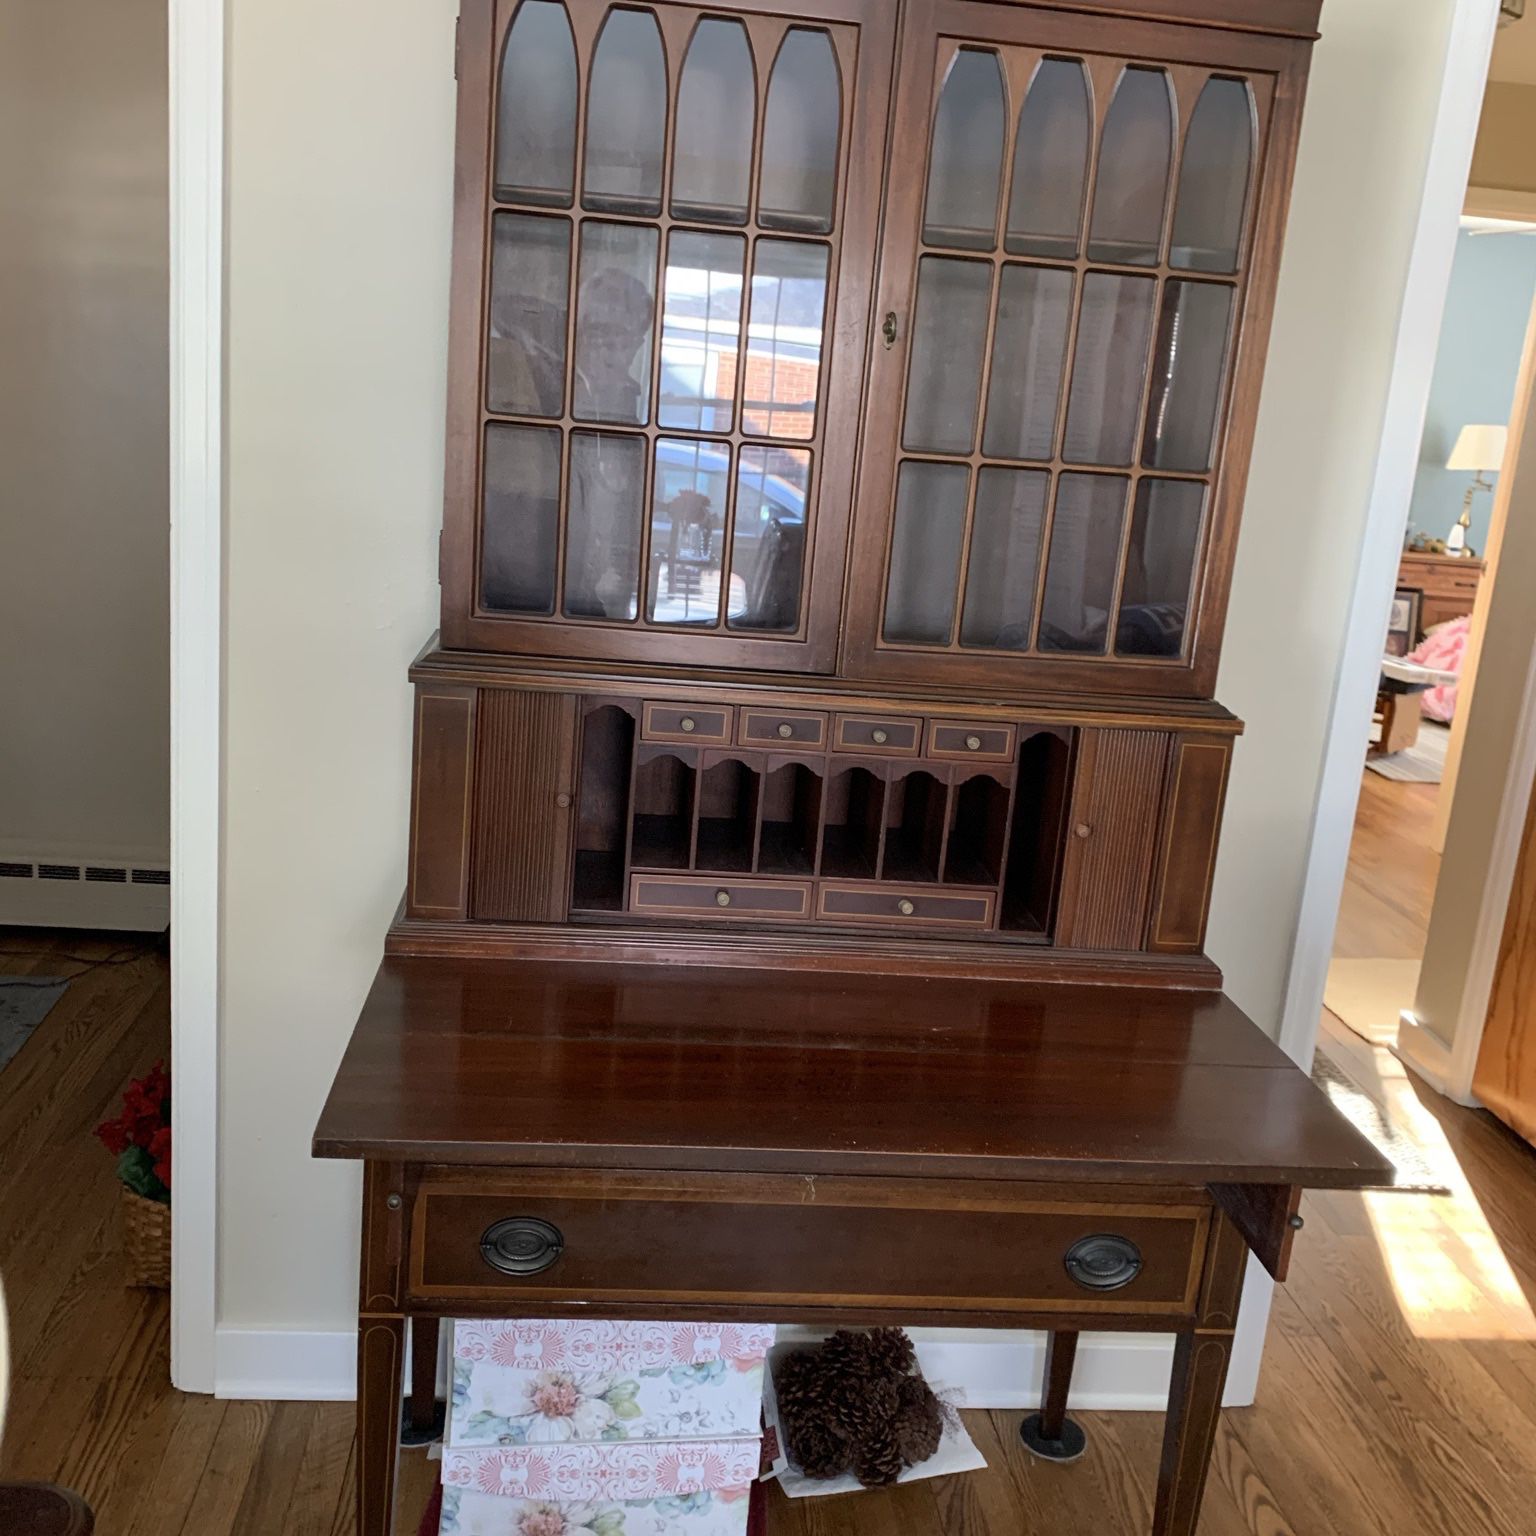 Antique Secretary Desk With Tons Of Storage And Cubby Holes! Excellent!